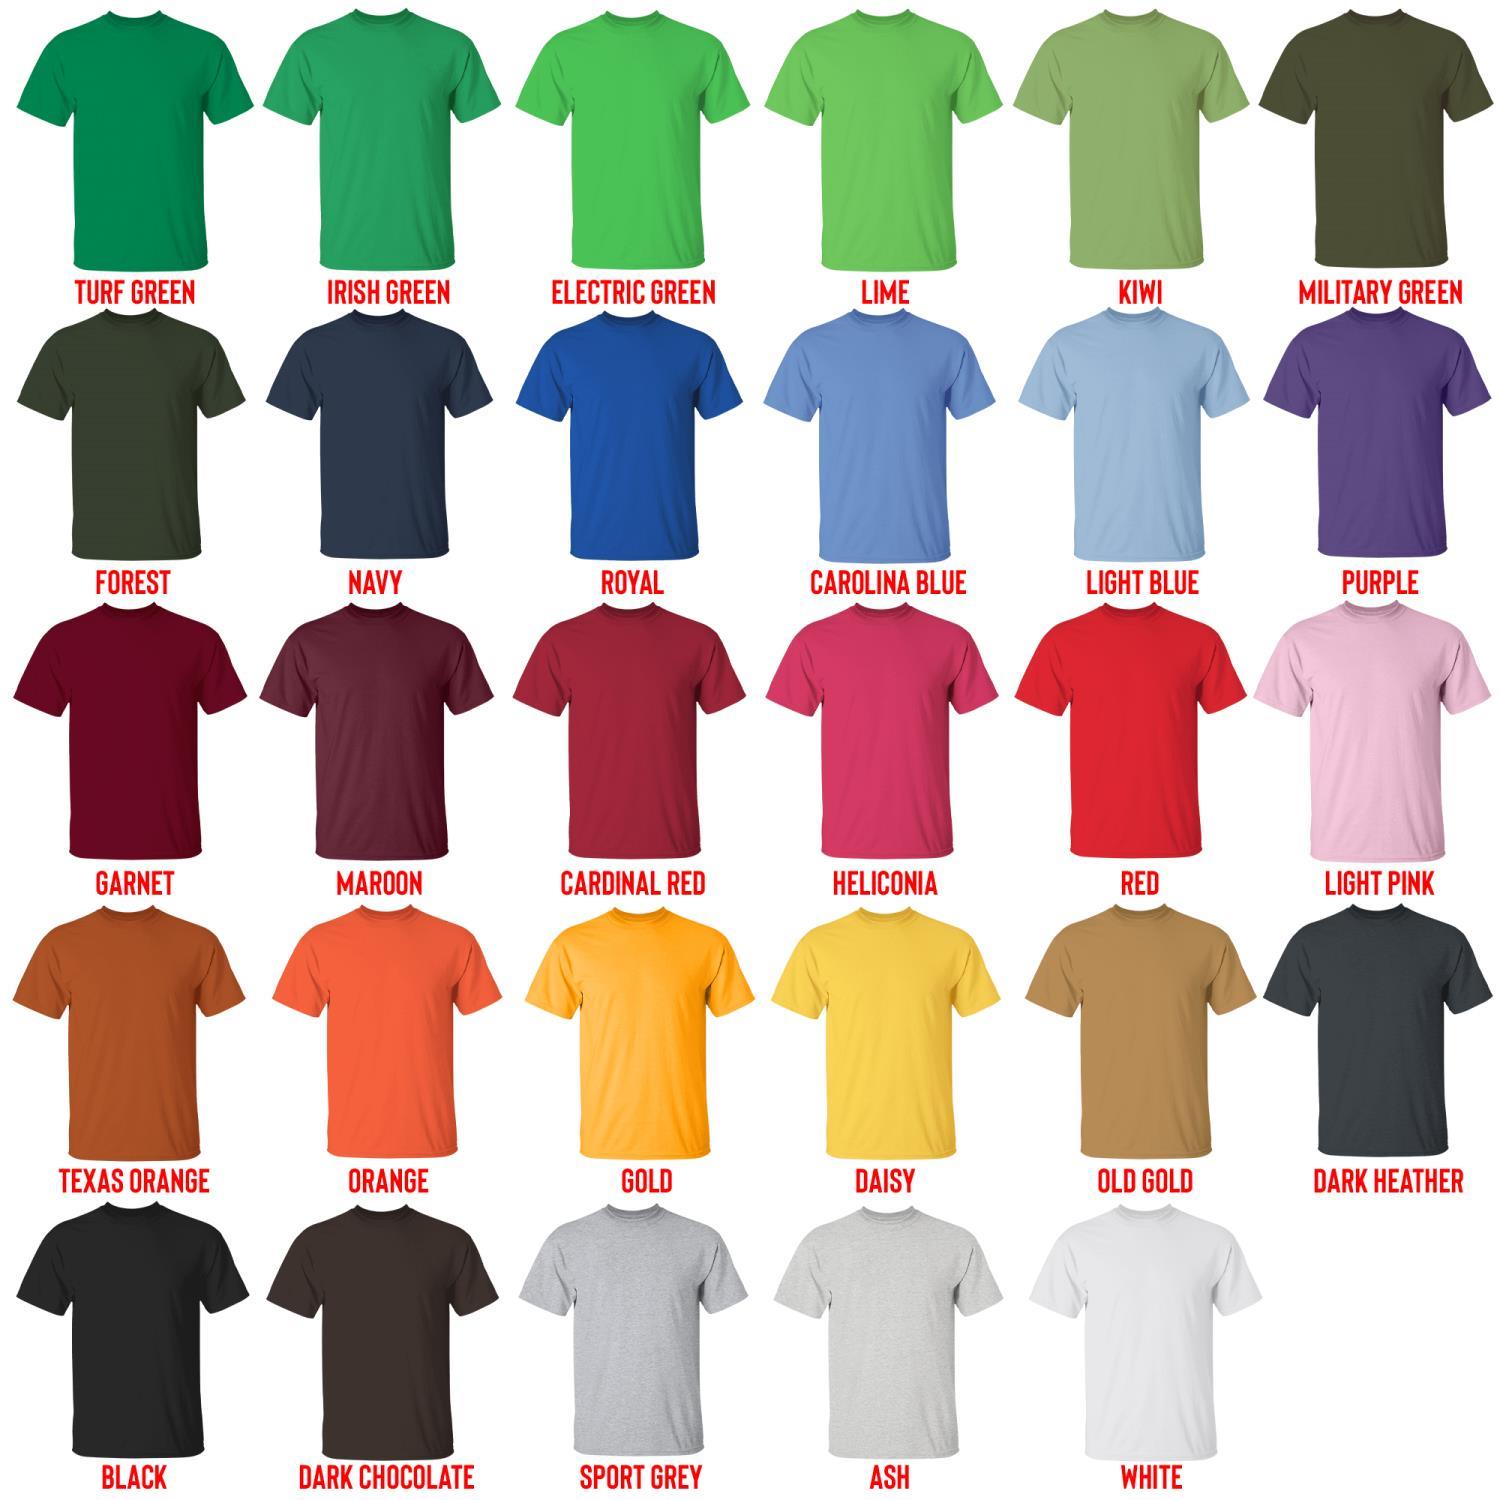 t shirt color chart - Jett Lawrence Store